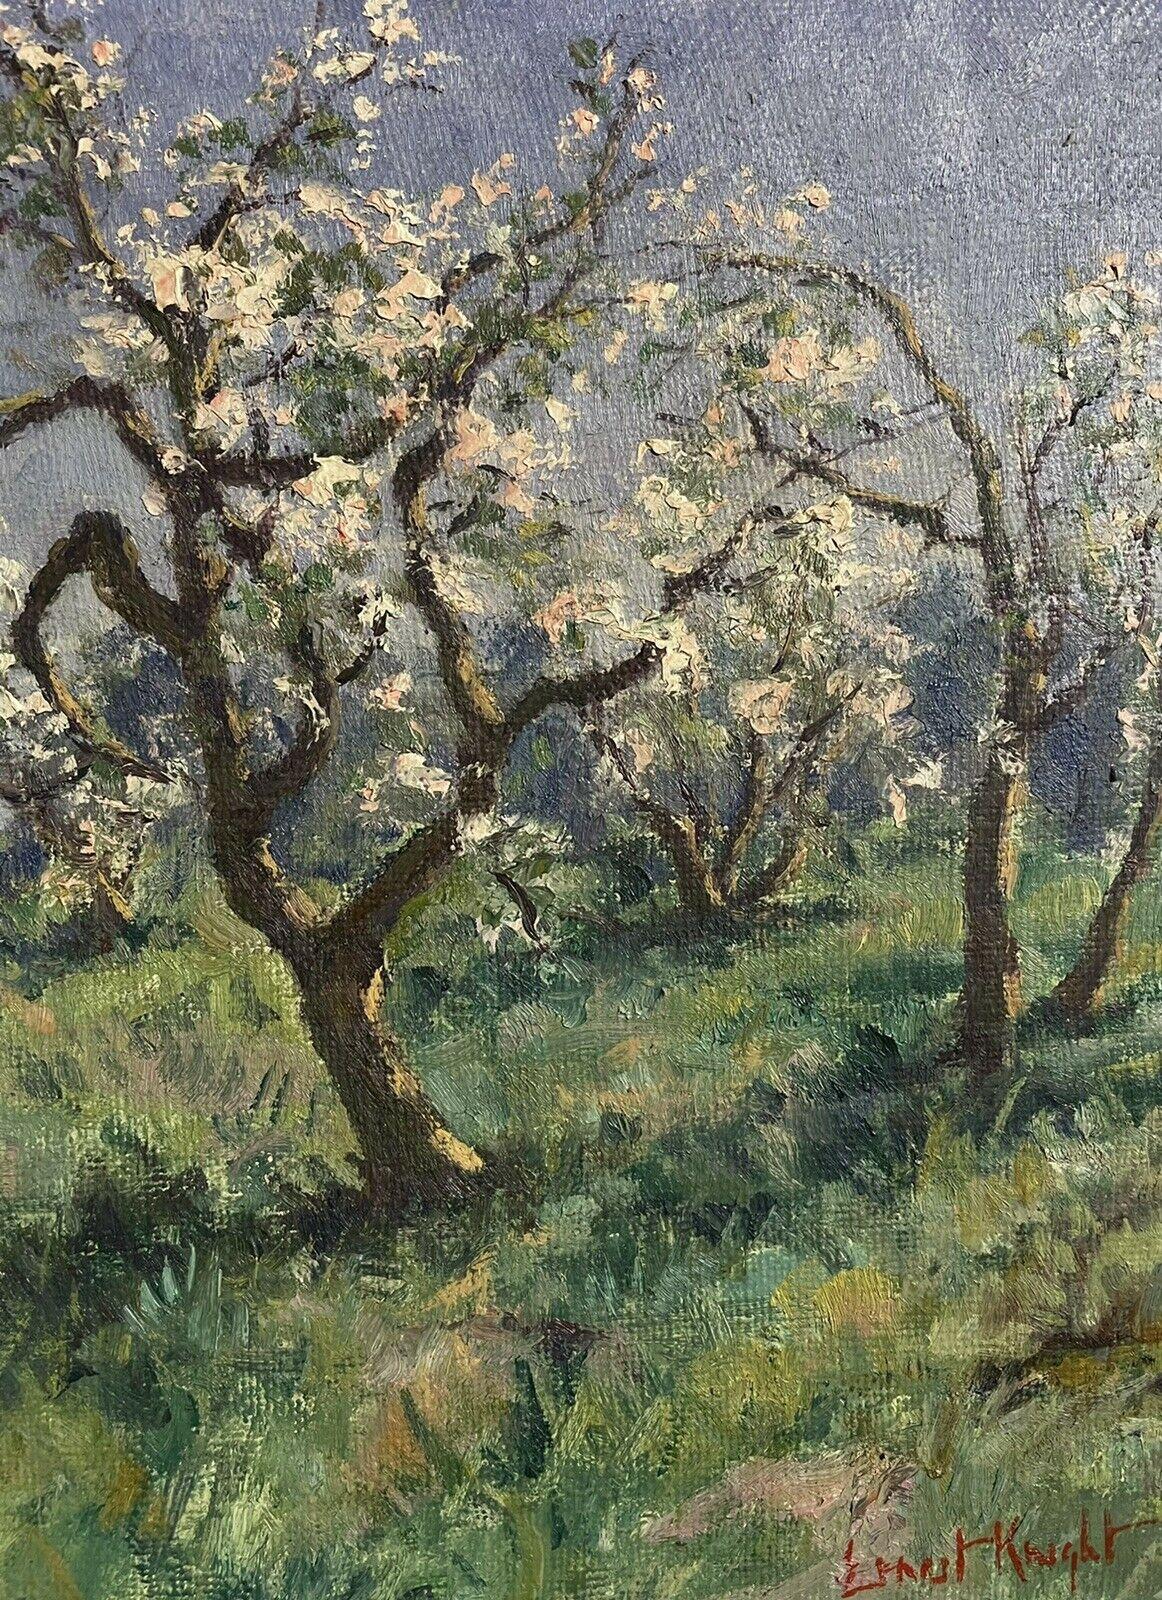 Artist/ School: Ernest Knight (British 1915-1995), signed lower corner

Title: Orchard in Blossom

Medium: oil painting on canvas, framed

Size:

framed: 17.25 x 21.25 inches
canvas:  14 x 18 inches

Provenance: private collection,